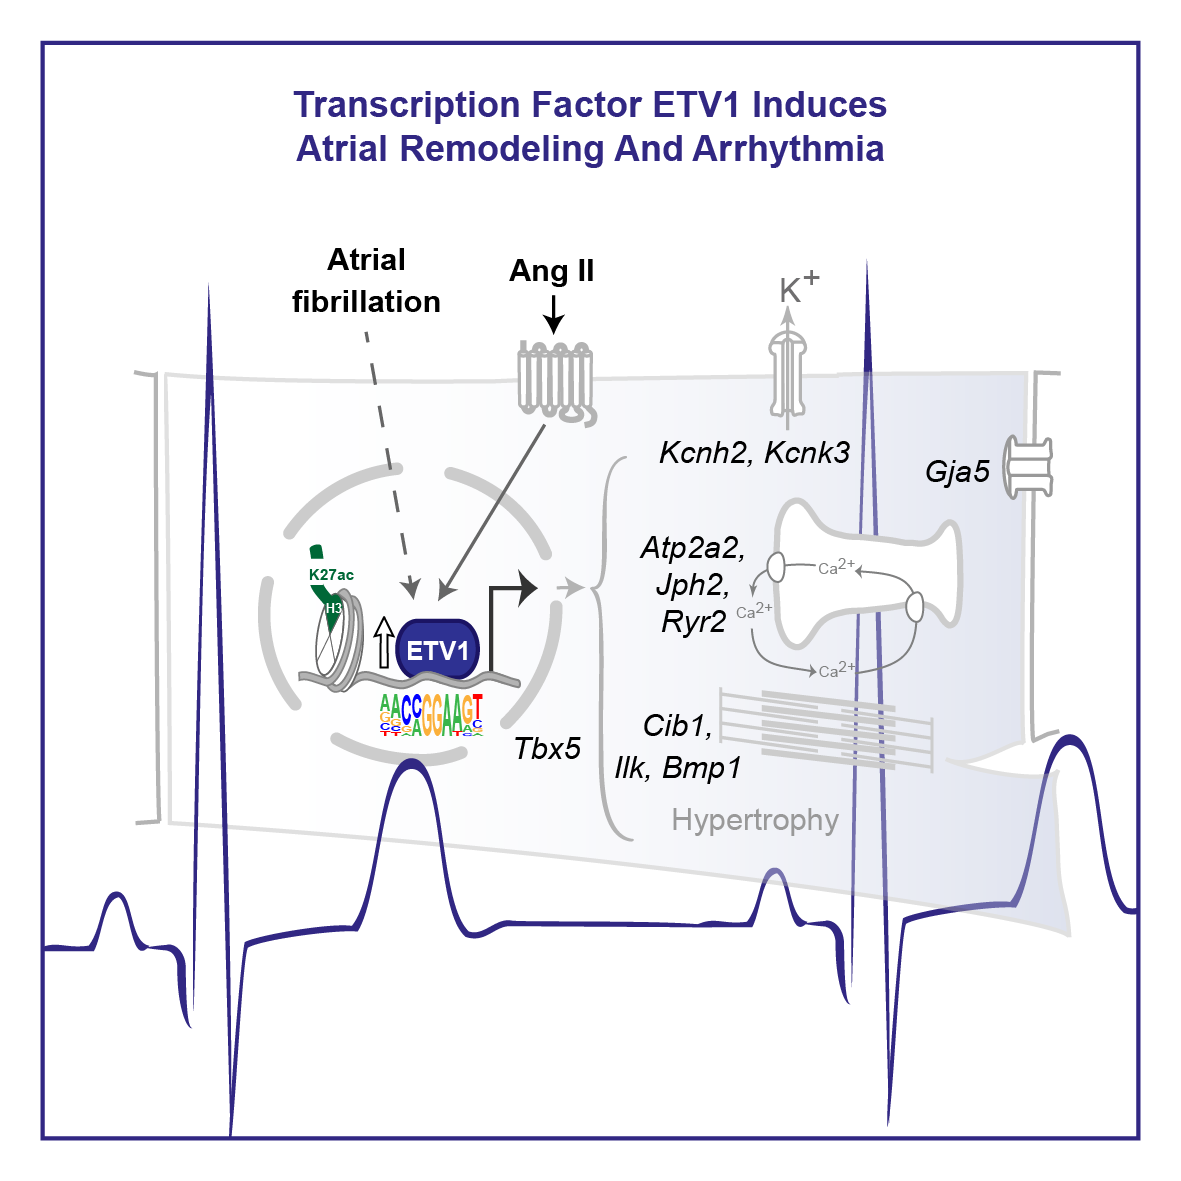 The Transcription Factor ETV1 Induces Atrial Remodeling and Arrhythmia